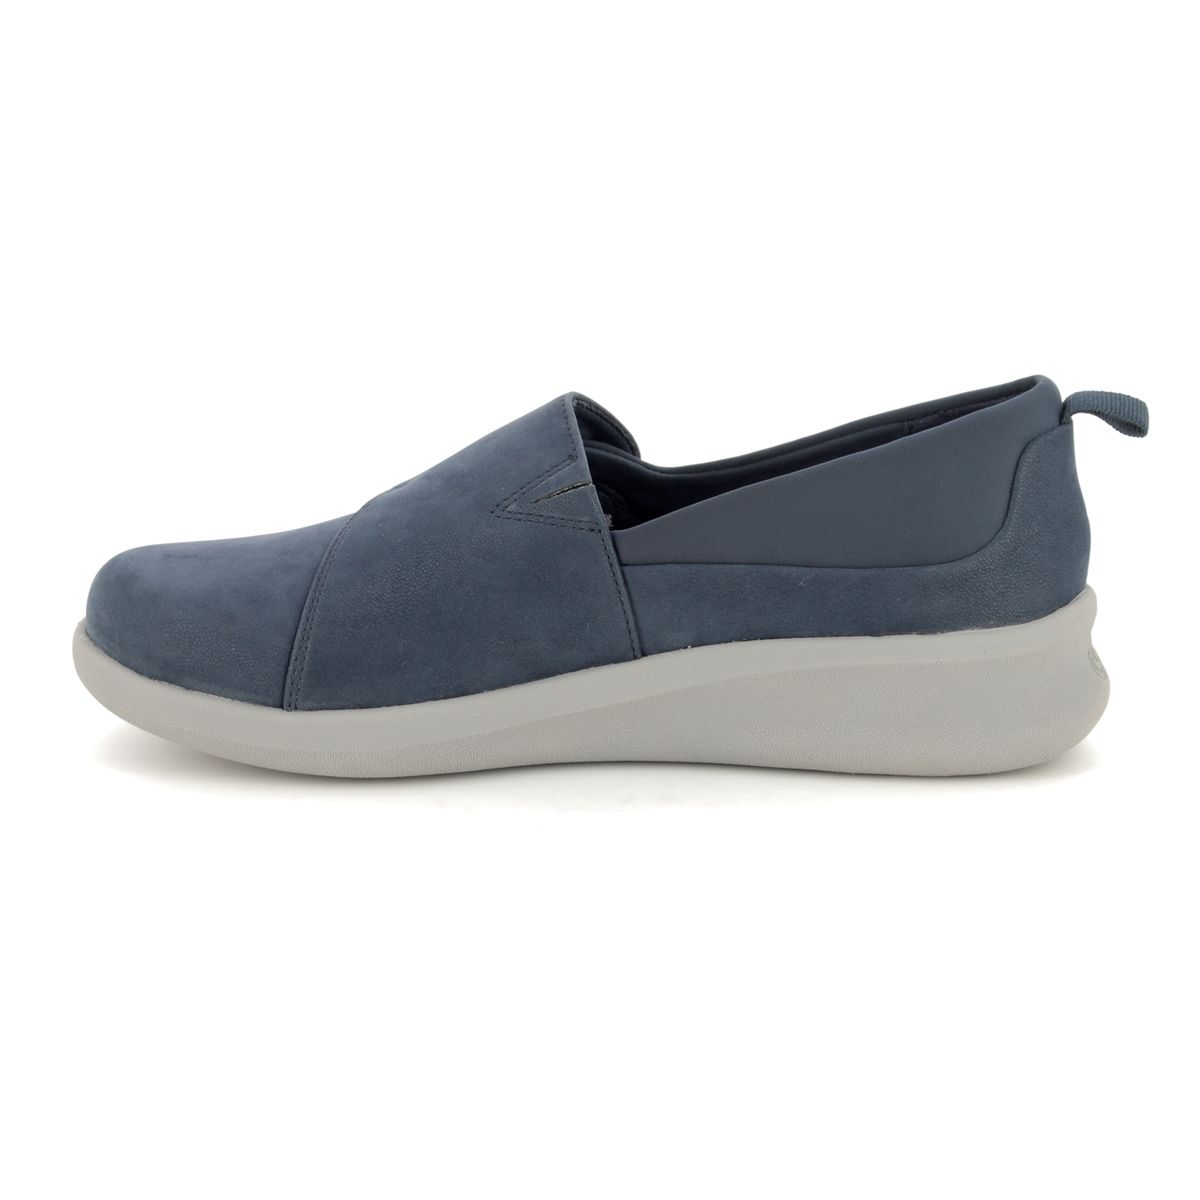 Clarks Sillian 2 Ease D Fit Navy Comfort Slip On Shoes